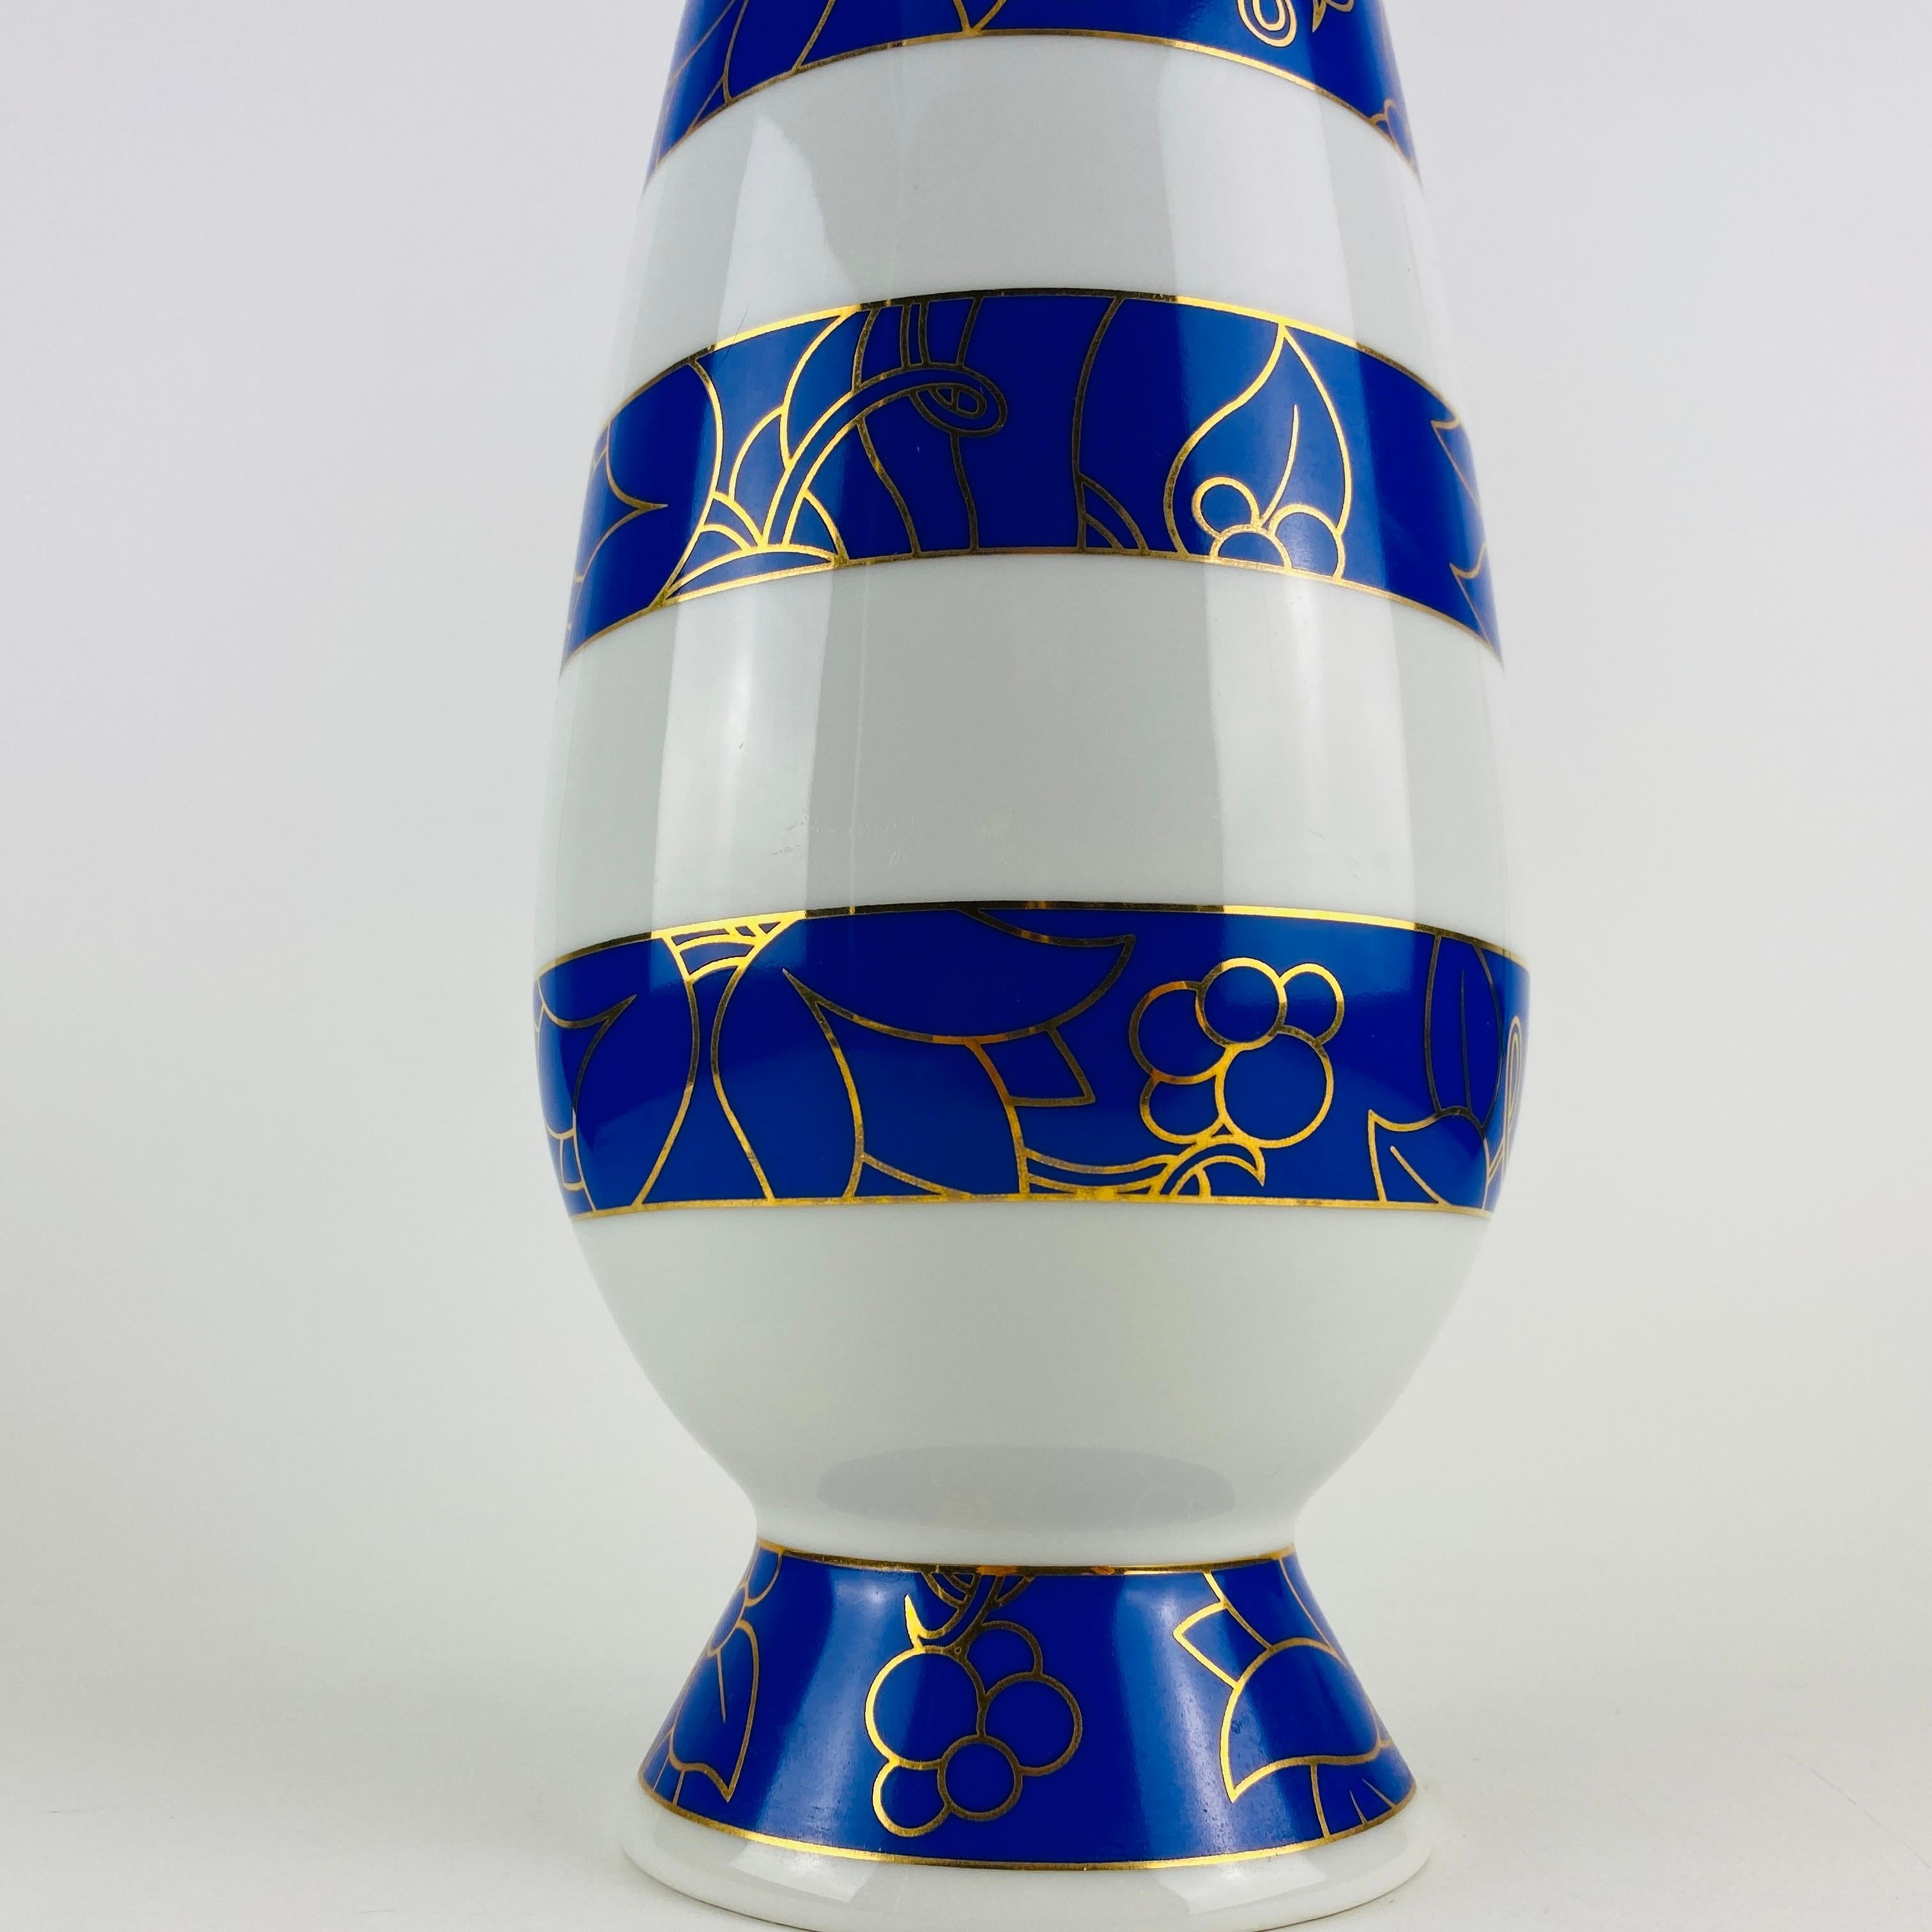 20th Century Alessi Tendentse Vase by Michael Graves for Alessandro Mendini 100% Make-up N32